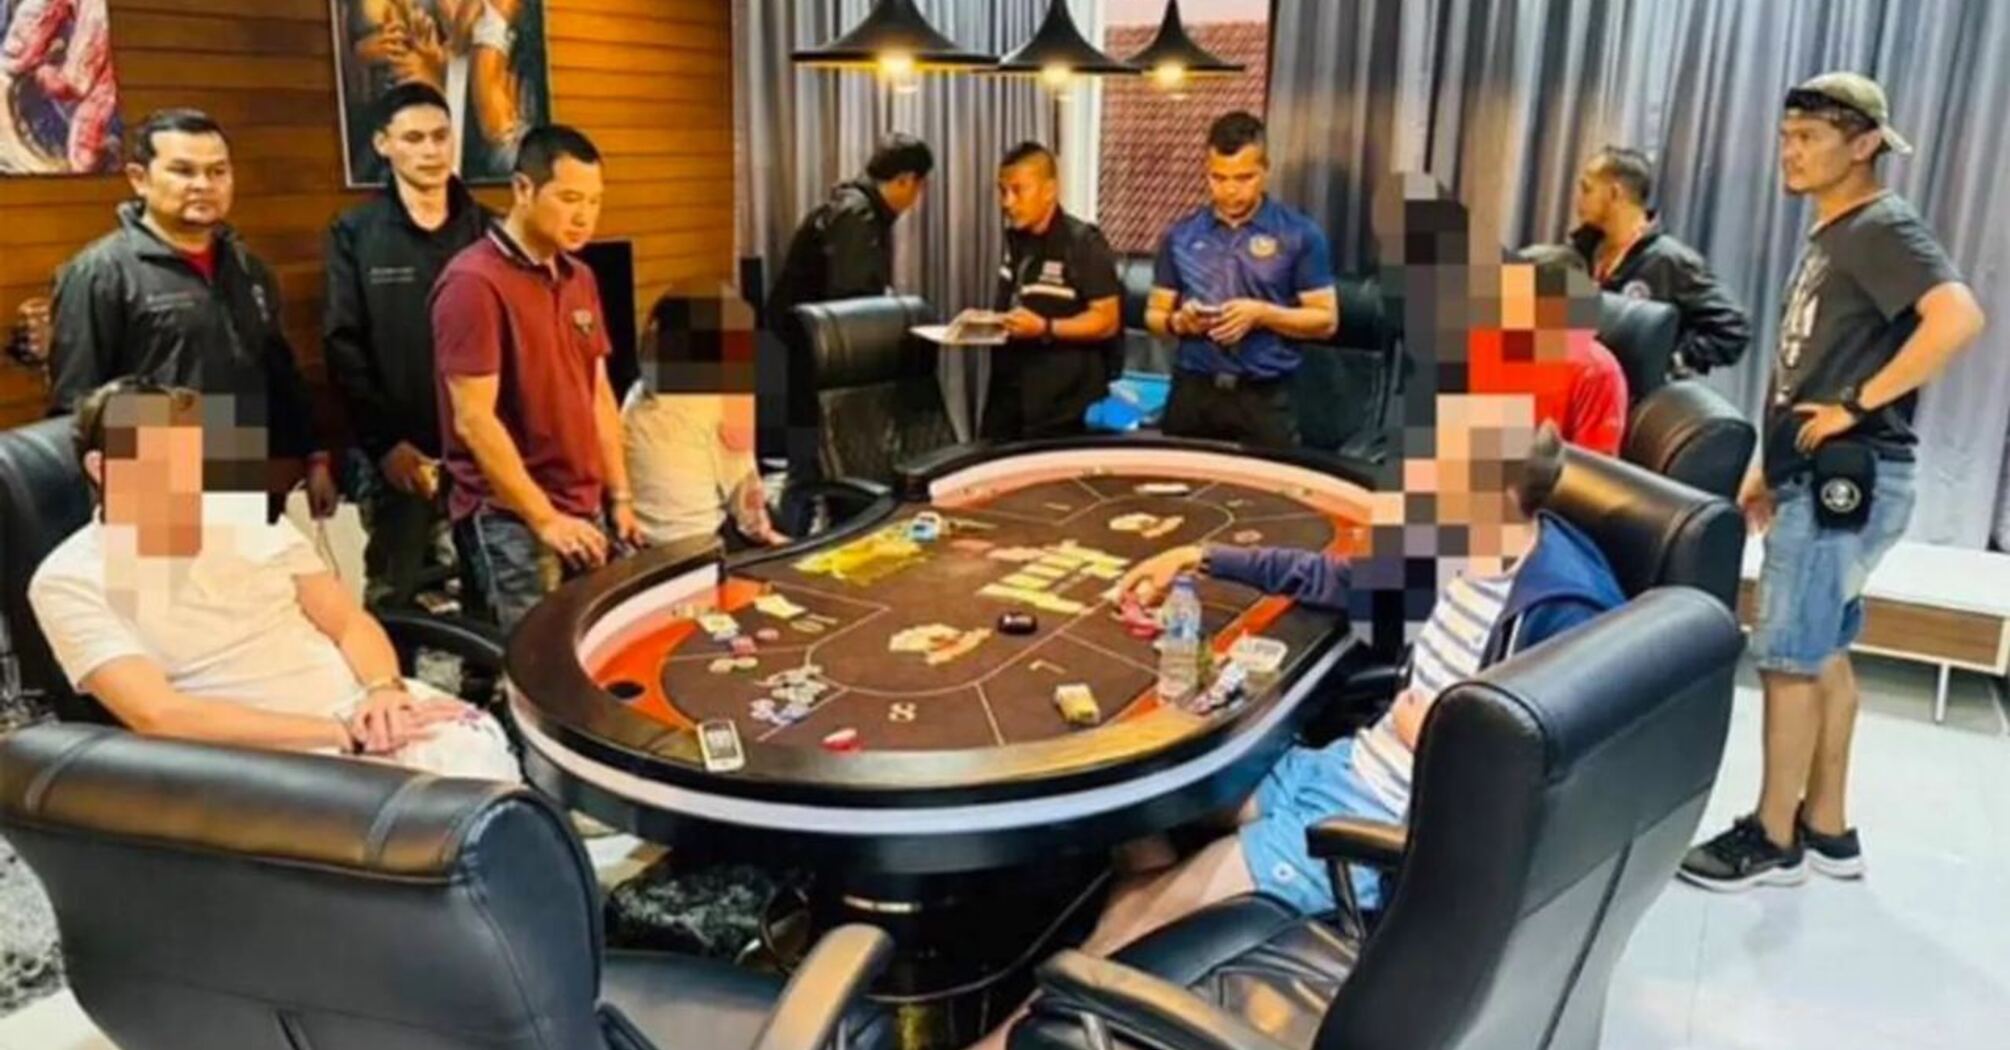 In Thailand, five Russians were arrested for playing poker